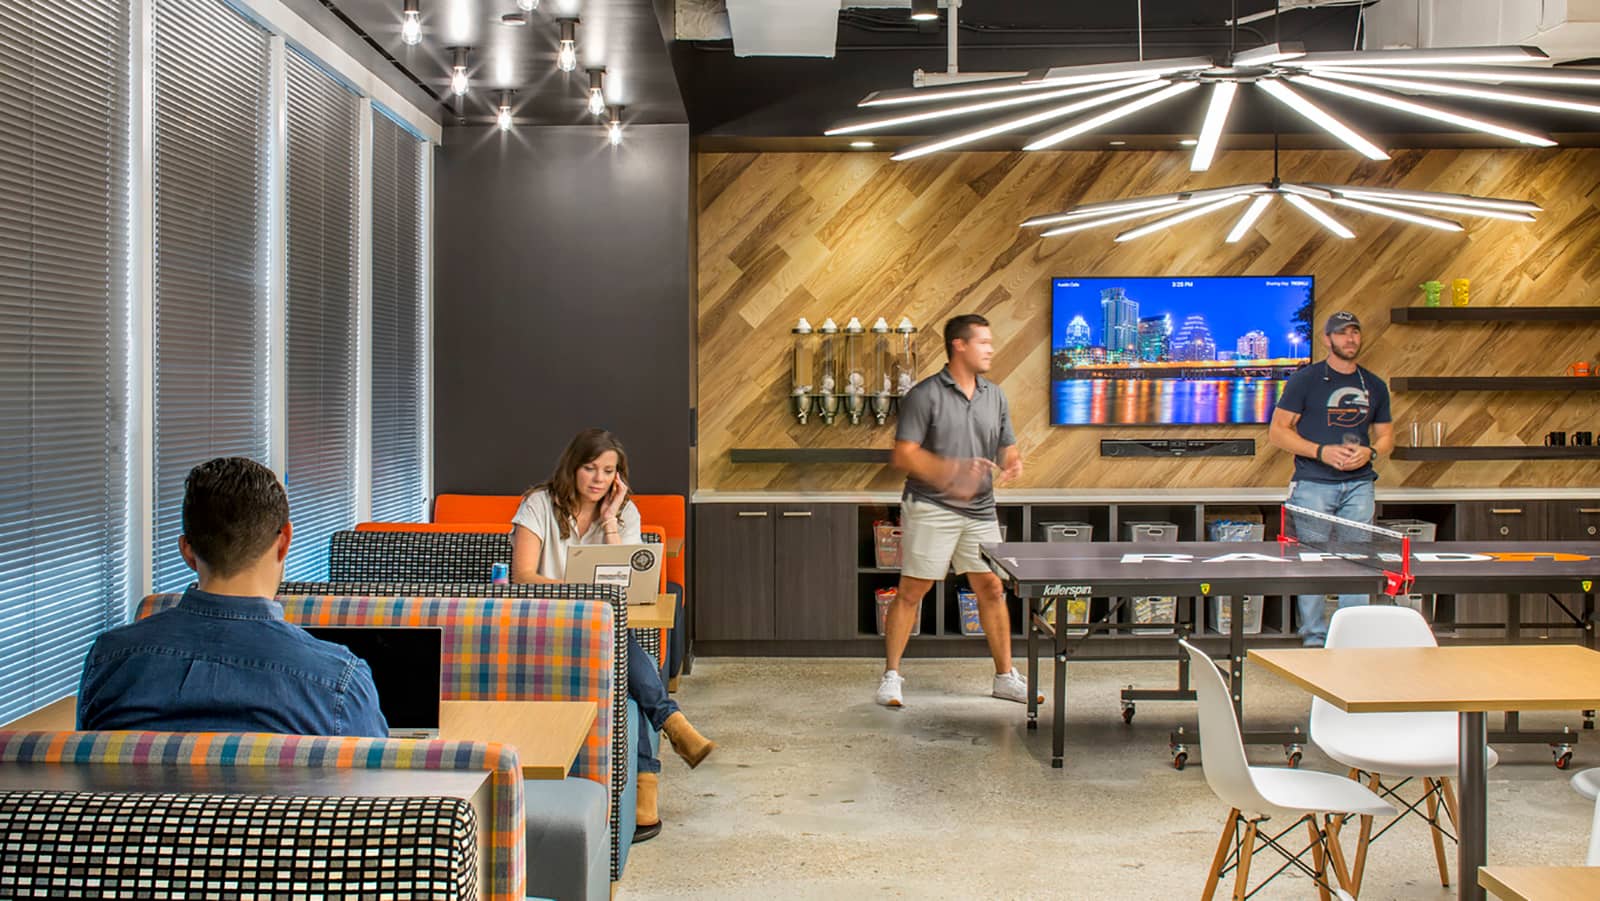 Rapid7's Austin's lounge and pantry space.